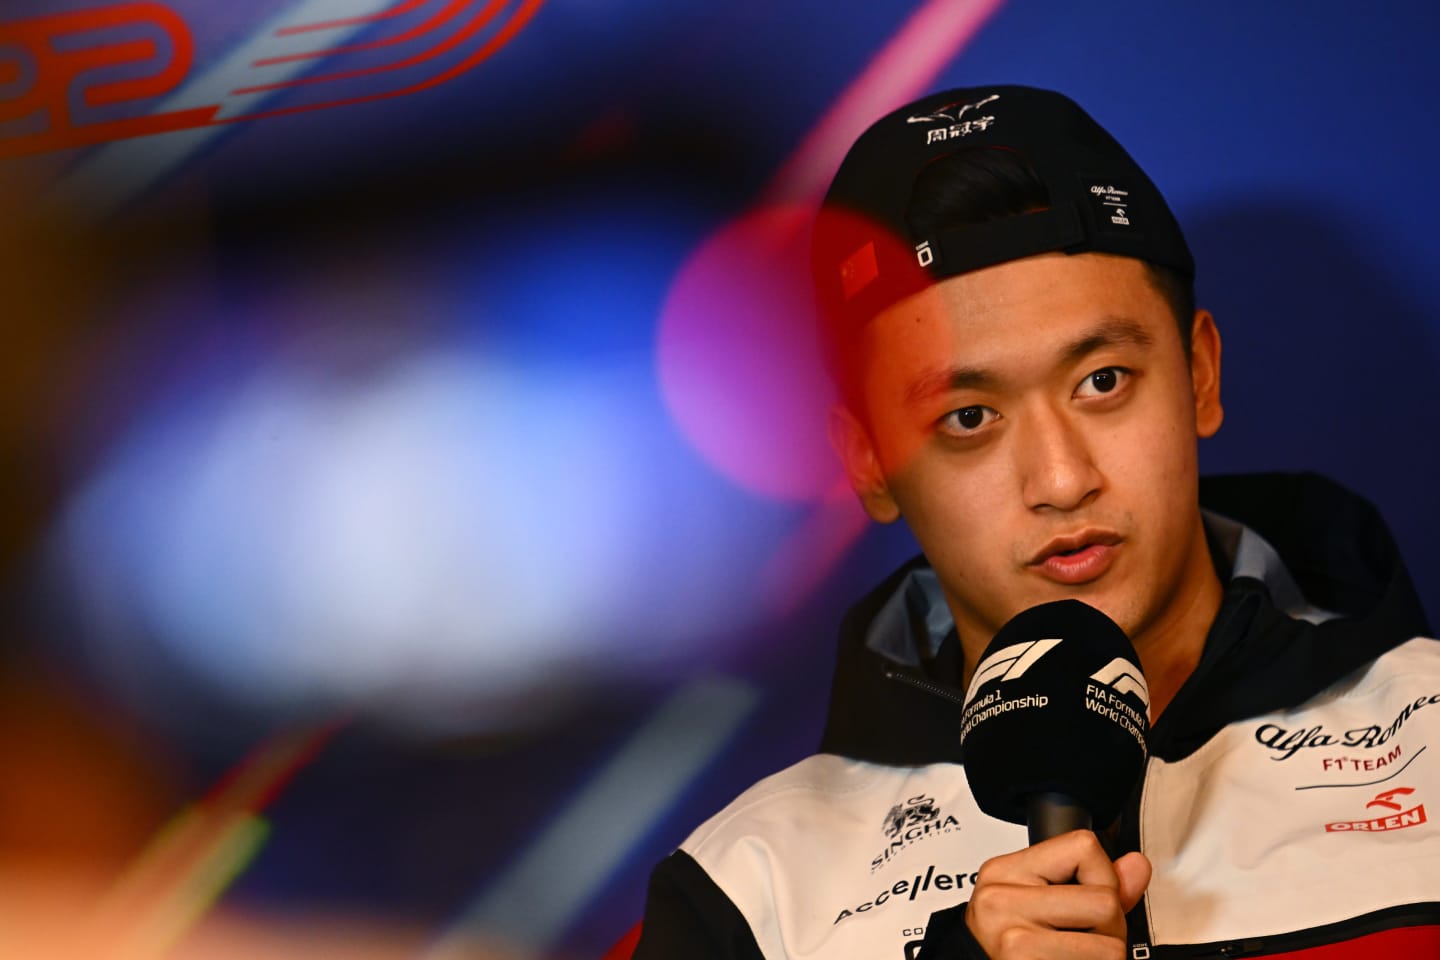 MONTREAL, QUEBEC - JUNE 17: Zhou Guanyu of China and Alfa Romeo F1 talks in the Drivers Press Conference prior to practice ahead of the F1 Grand Prix of Canada at Circuit Gilles Villeneuve on June 17, 2022 in Montreal, Quebec. (Photo by Clive Mason/Getty Images)